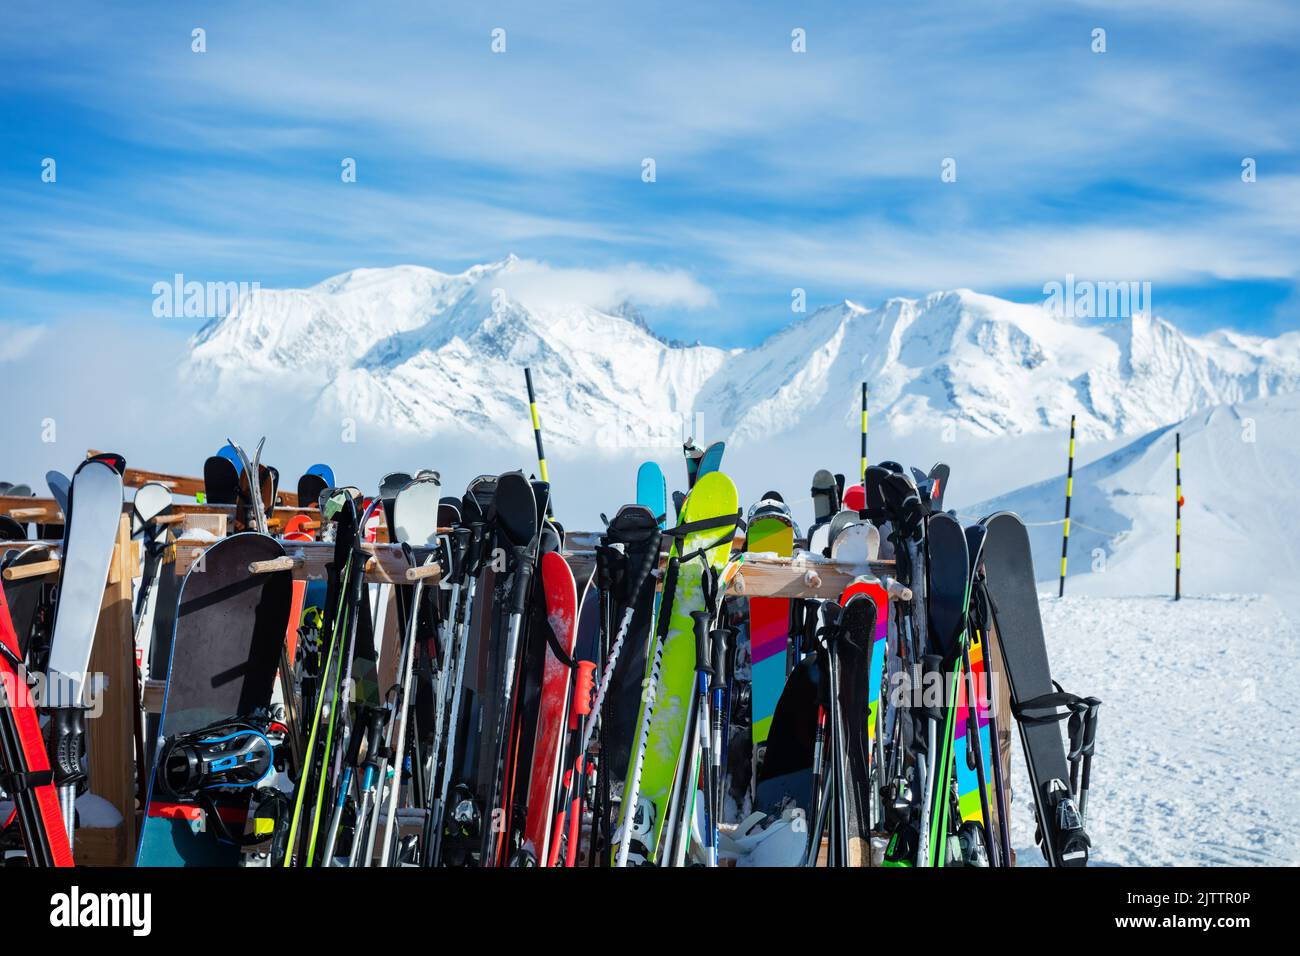 Many skis stand on alpine resort over mountain tops Stock Photo